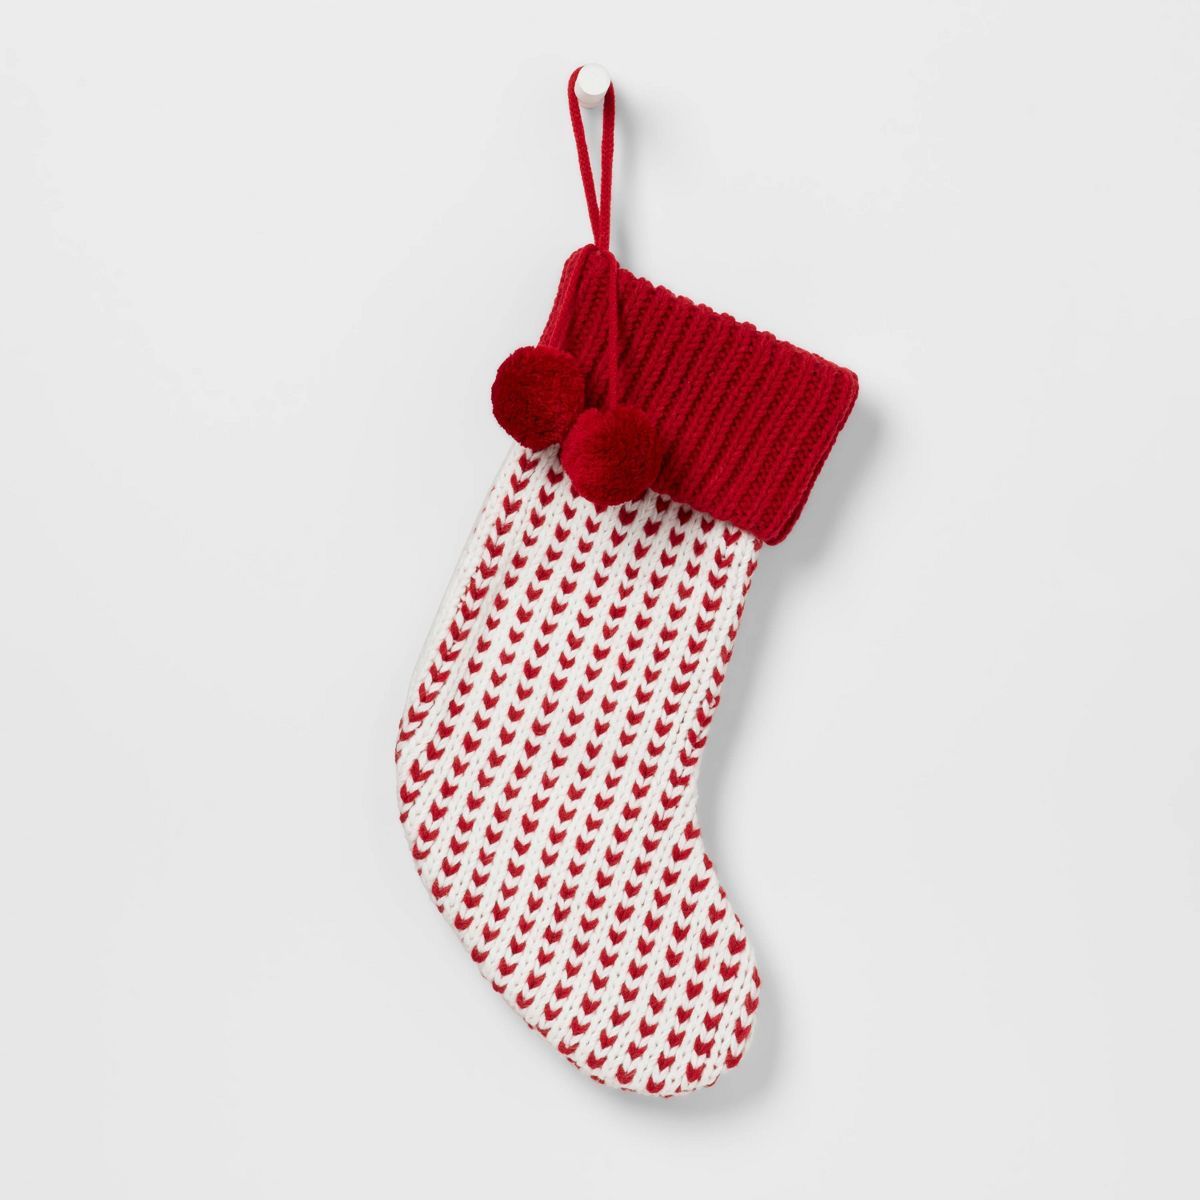 20" Chunky Knit Christmas Holiday Stocking with Pom Poms - Wondershop™ | Target